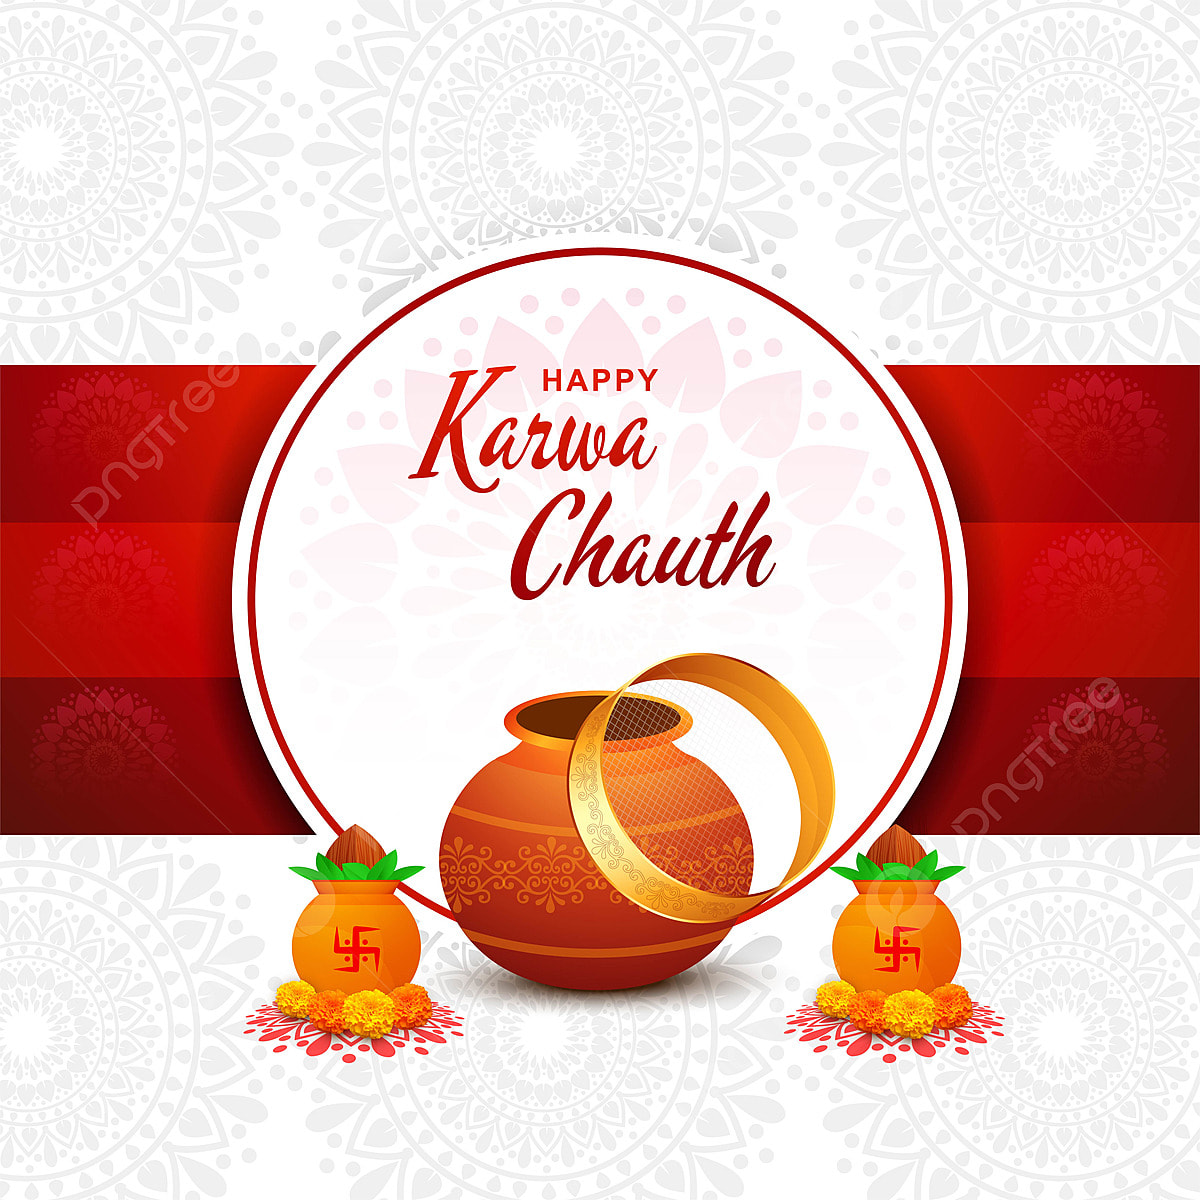 Karwa chauth vector hd images happy karwa chauth beautiful wallpaper background vector karva abstract backgroun png image for free download